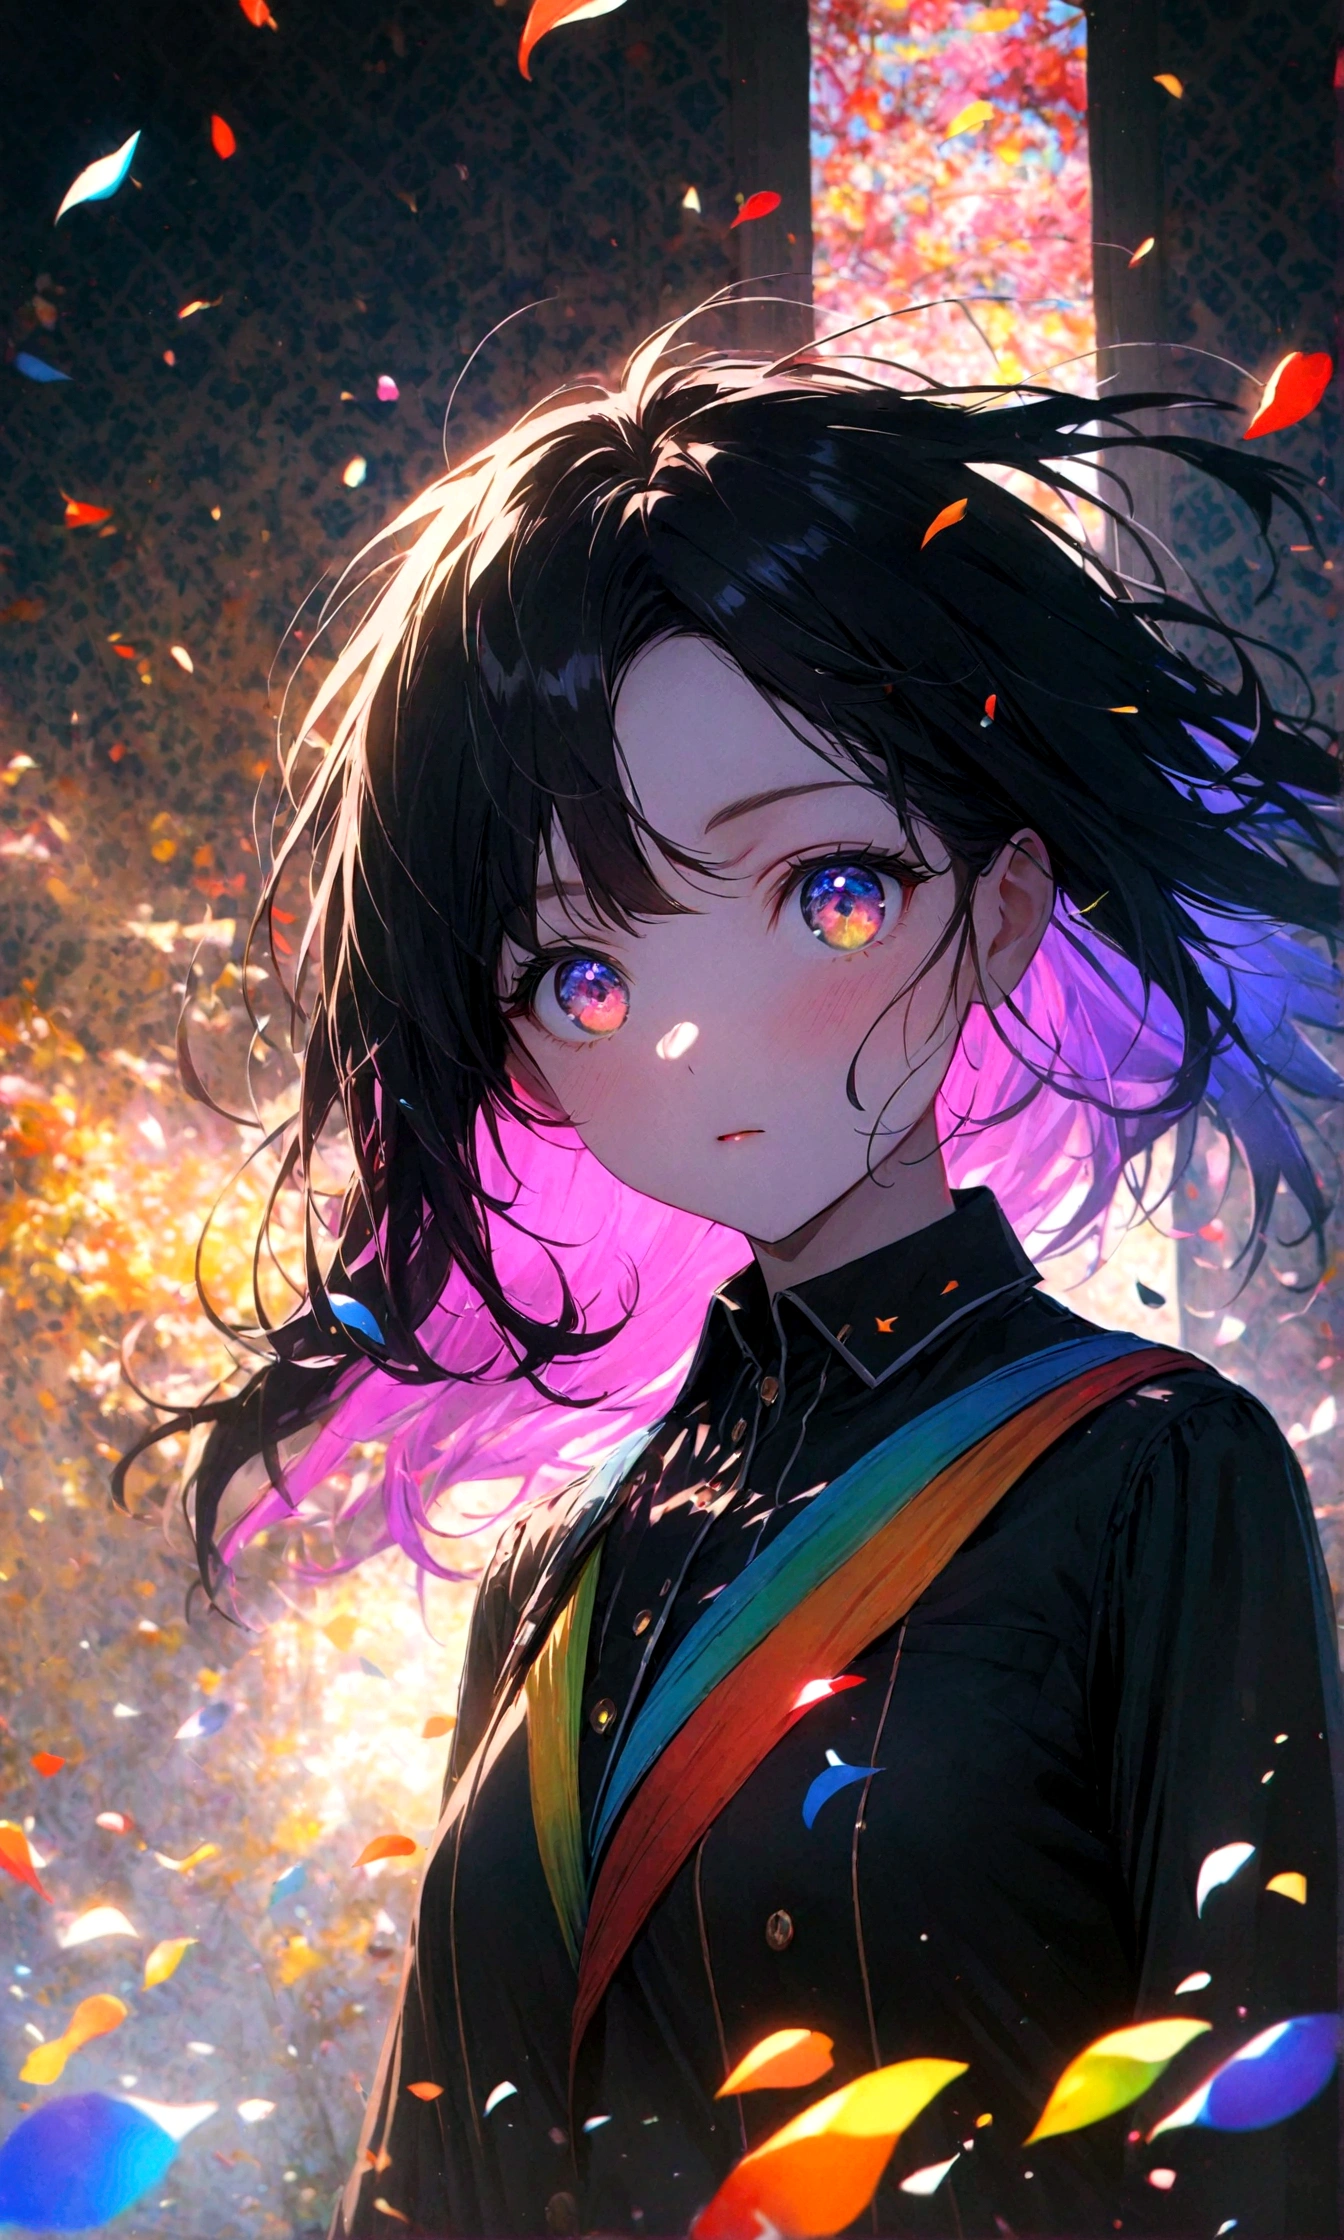 (female\(student, age of 15, JK, short silver floating hair, cosmic colored eyes, black color uniform of school, pale skin, tired face with no shine in the eyes\) is looking up at the sky), (so many shiny red scale goldfishes are swimming in the air), beautiful sky, beautiful clouds, summery colorful flowers are blooming here and there, you can feel the flowing wind shining with colorful petals, there is the noonday moon and noonday stars in the sky, BREAK ,quality\(8k,wallpaper of extremely detailed CG unit, ​masterpiece,hight resolution,top-quality,top-quality real texture skin,hyper realisitic,increase the resolution,RAW photos,best qualtiy,highly detailed,the wallpaper,cinematic lighting,ray trace,golden ratio\),long shot